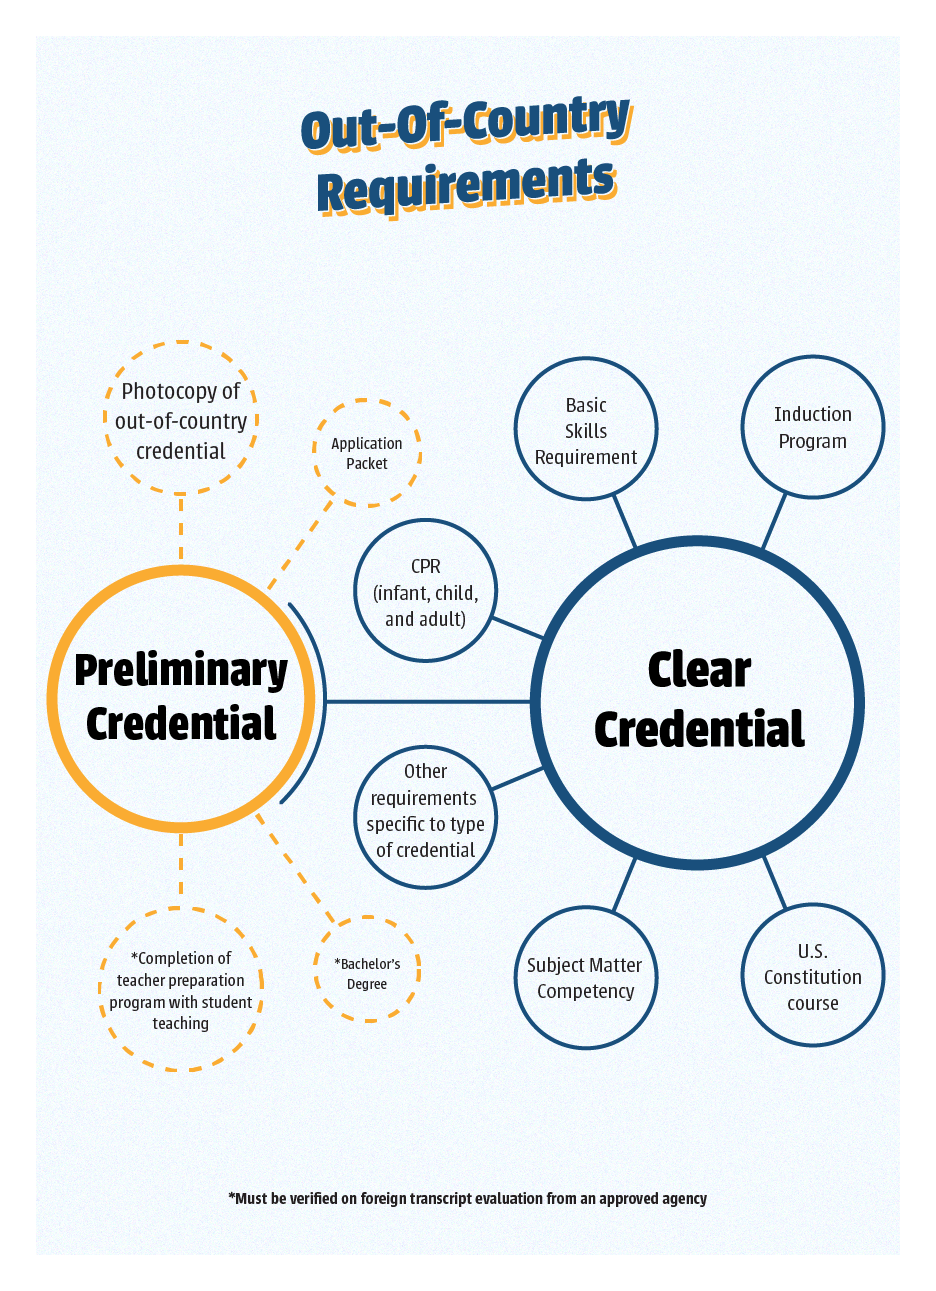 Image shows the materials needed for a Preliminary credential and the requirements to upgrade it to a Clear credential. If you meet all requirements at the time you apply, you will be issued a Clear instead of a Preliminary.